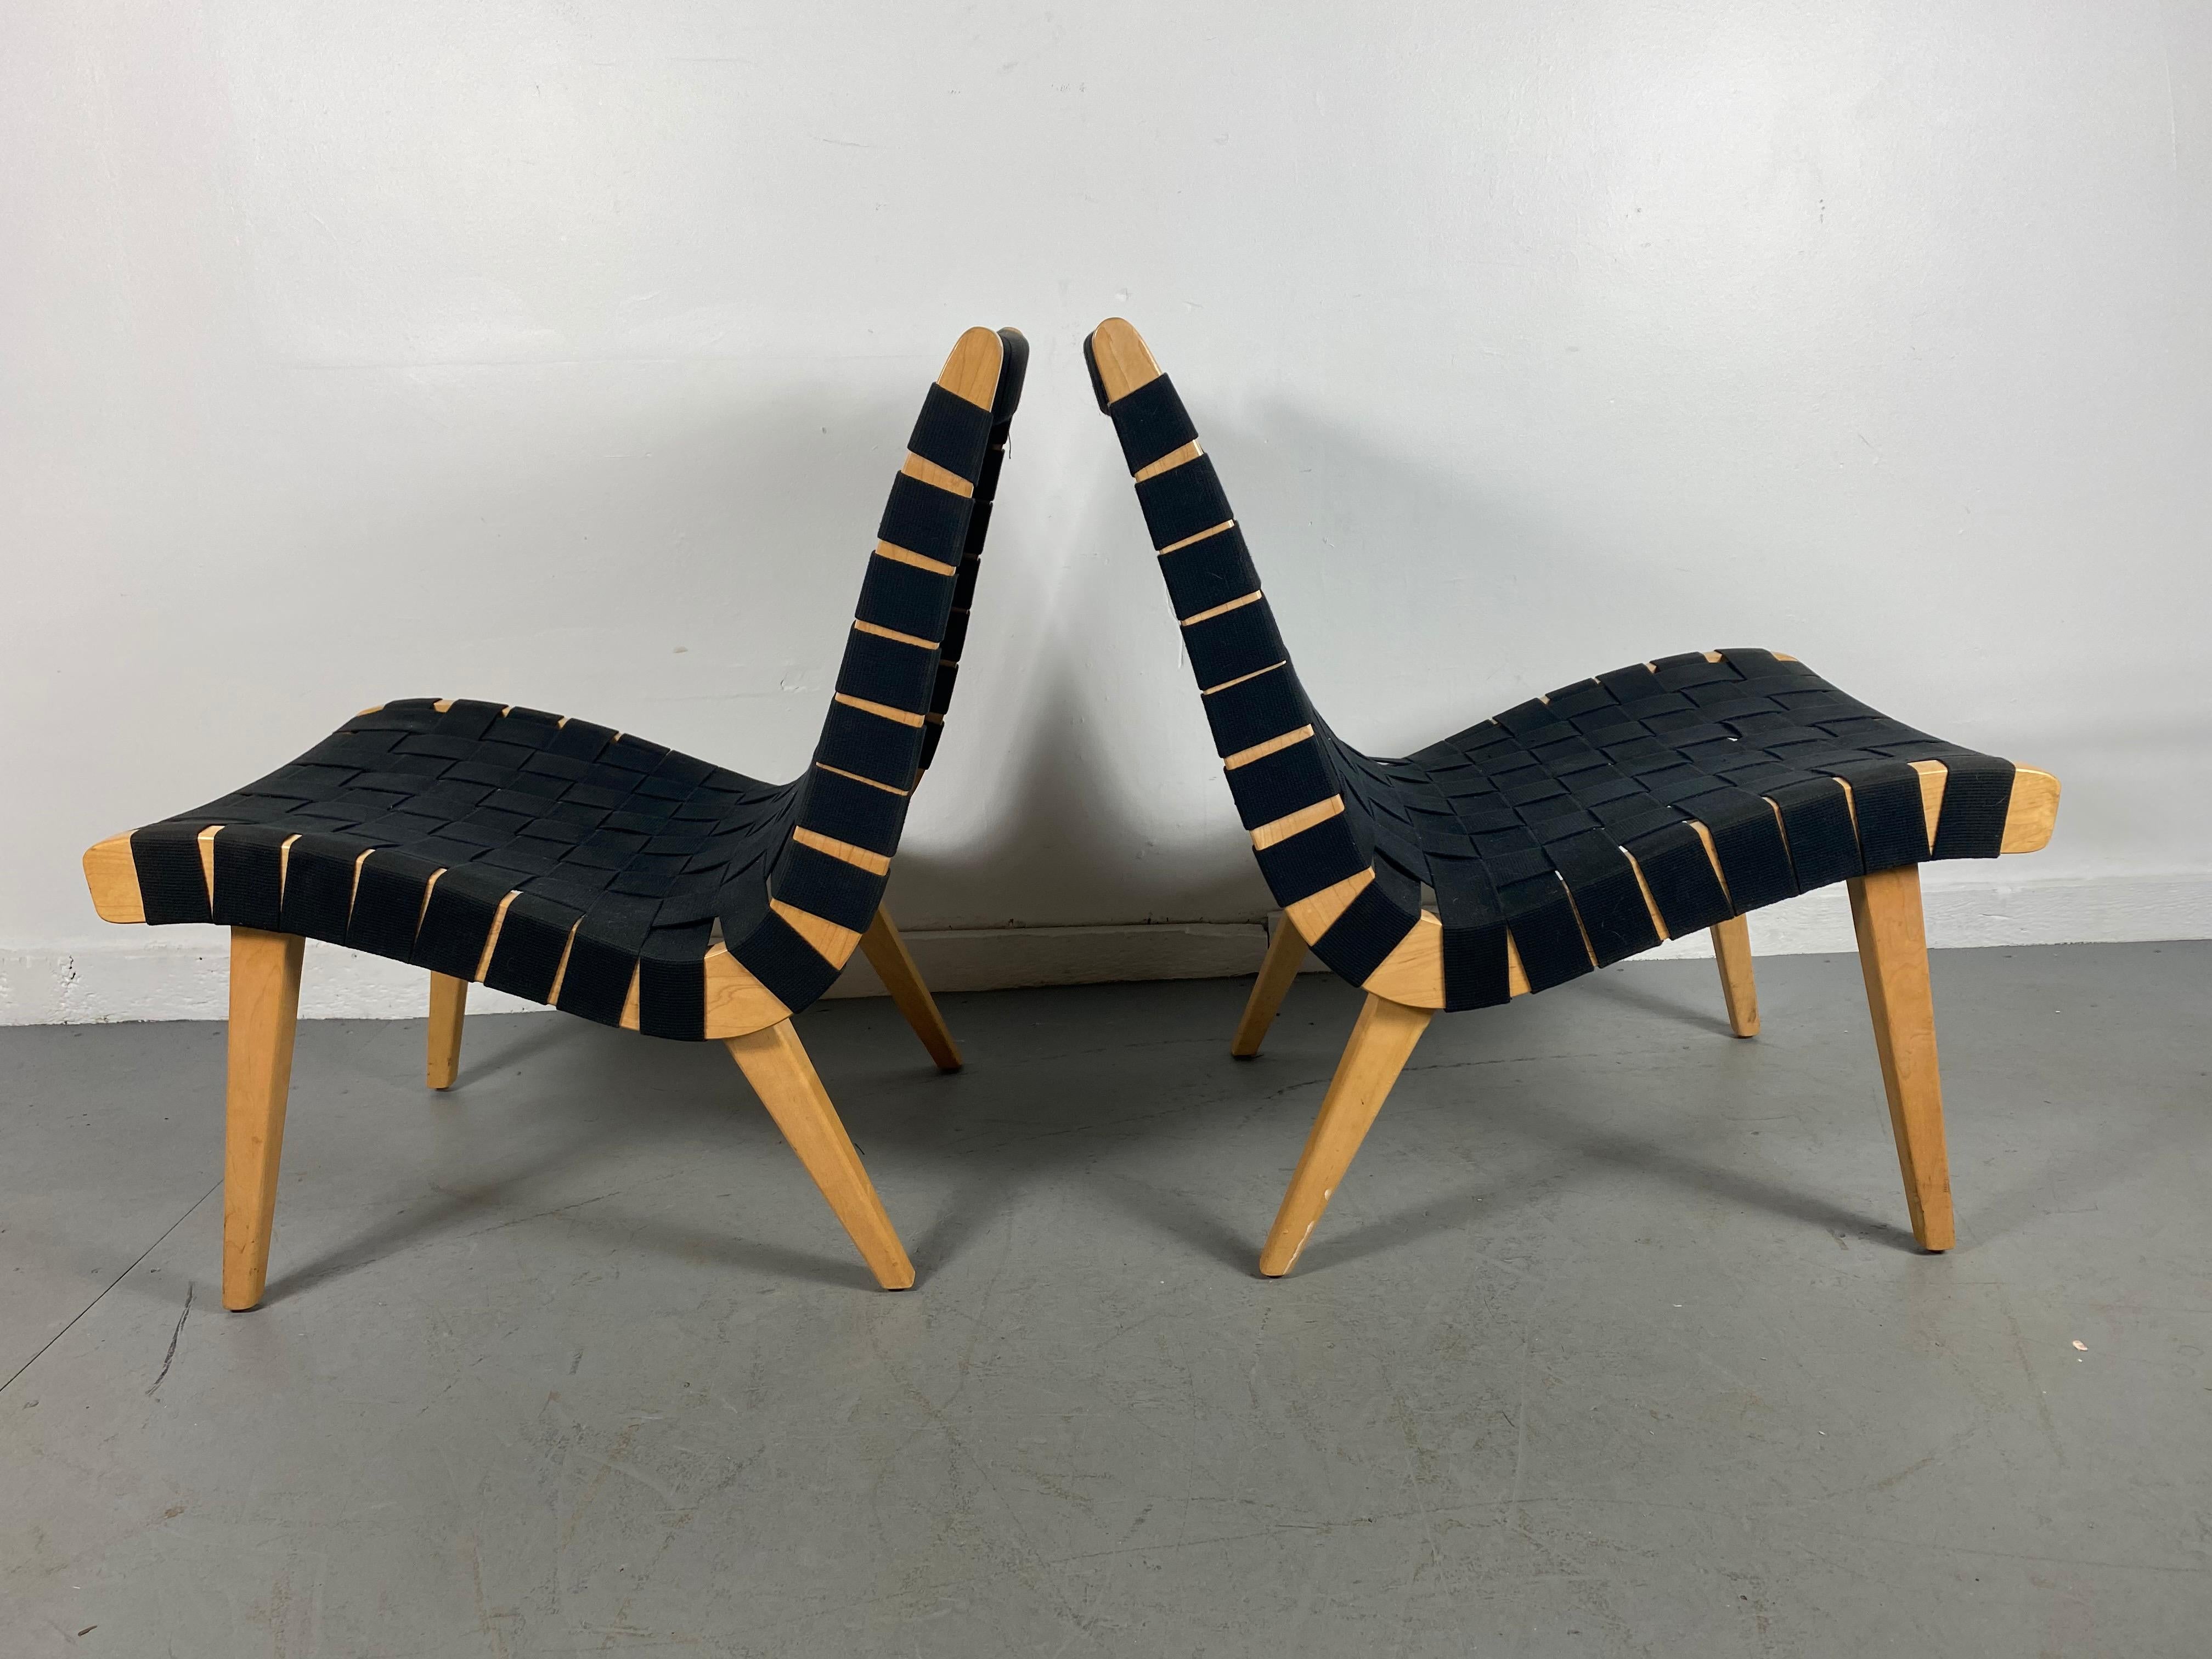 American Pair of Jens Risom Webbed Lounge Chairs, Risom / Knoll, Classic Modernist